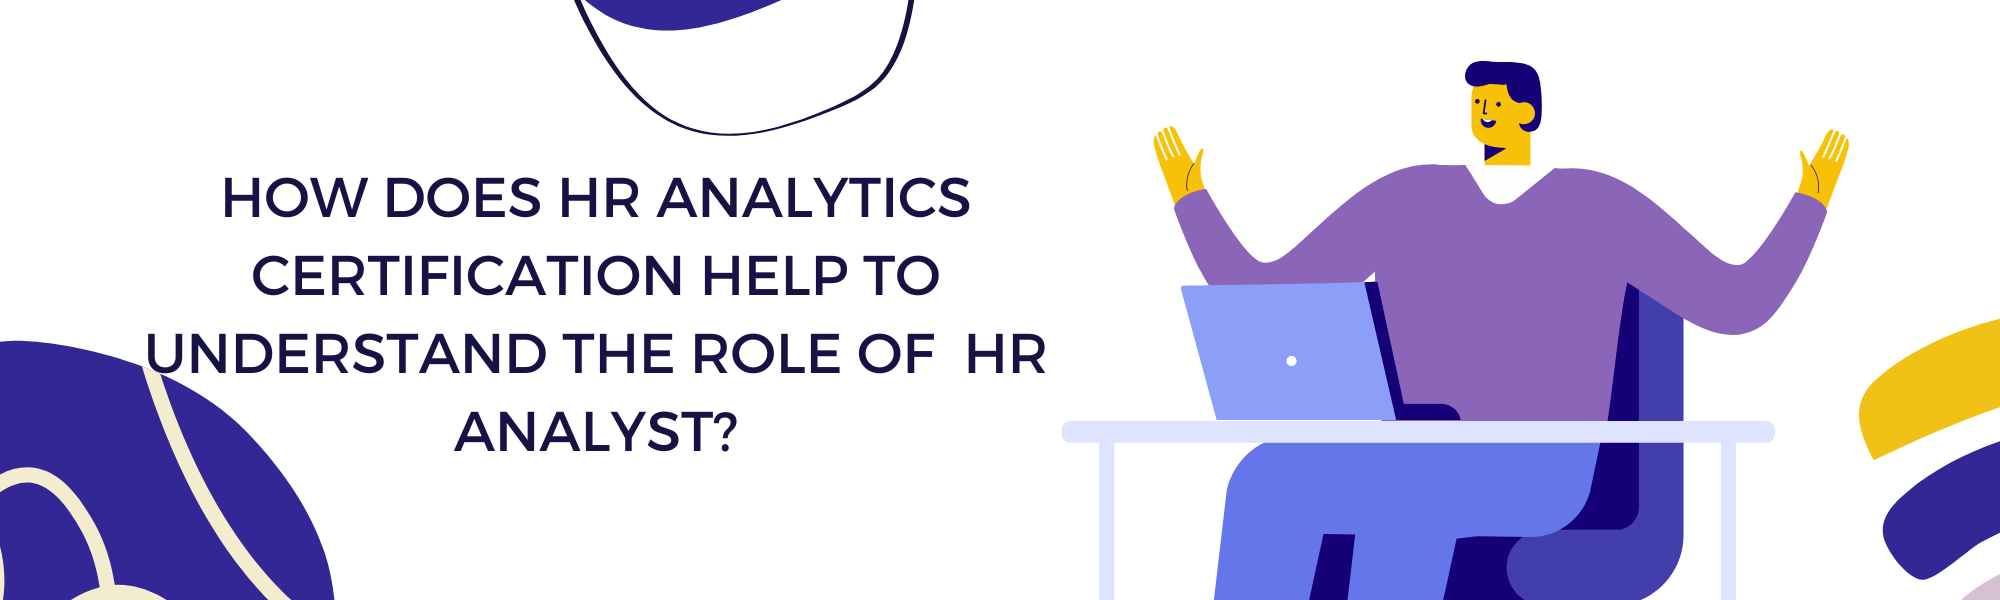 How does HR Analytics Certification Help to Understand the Role of HR Analyst?